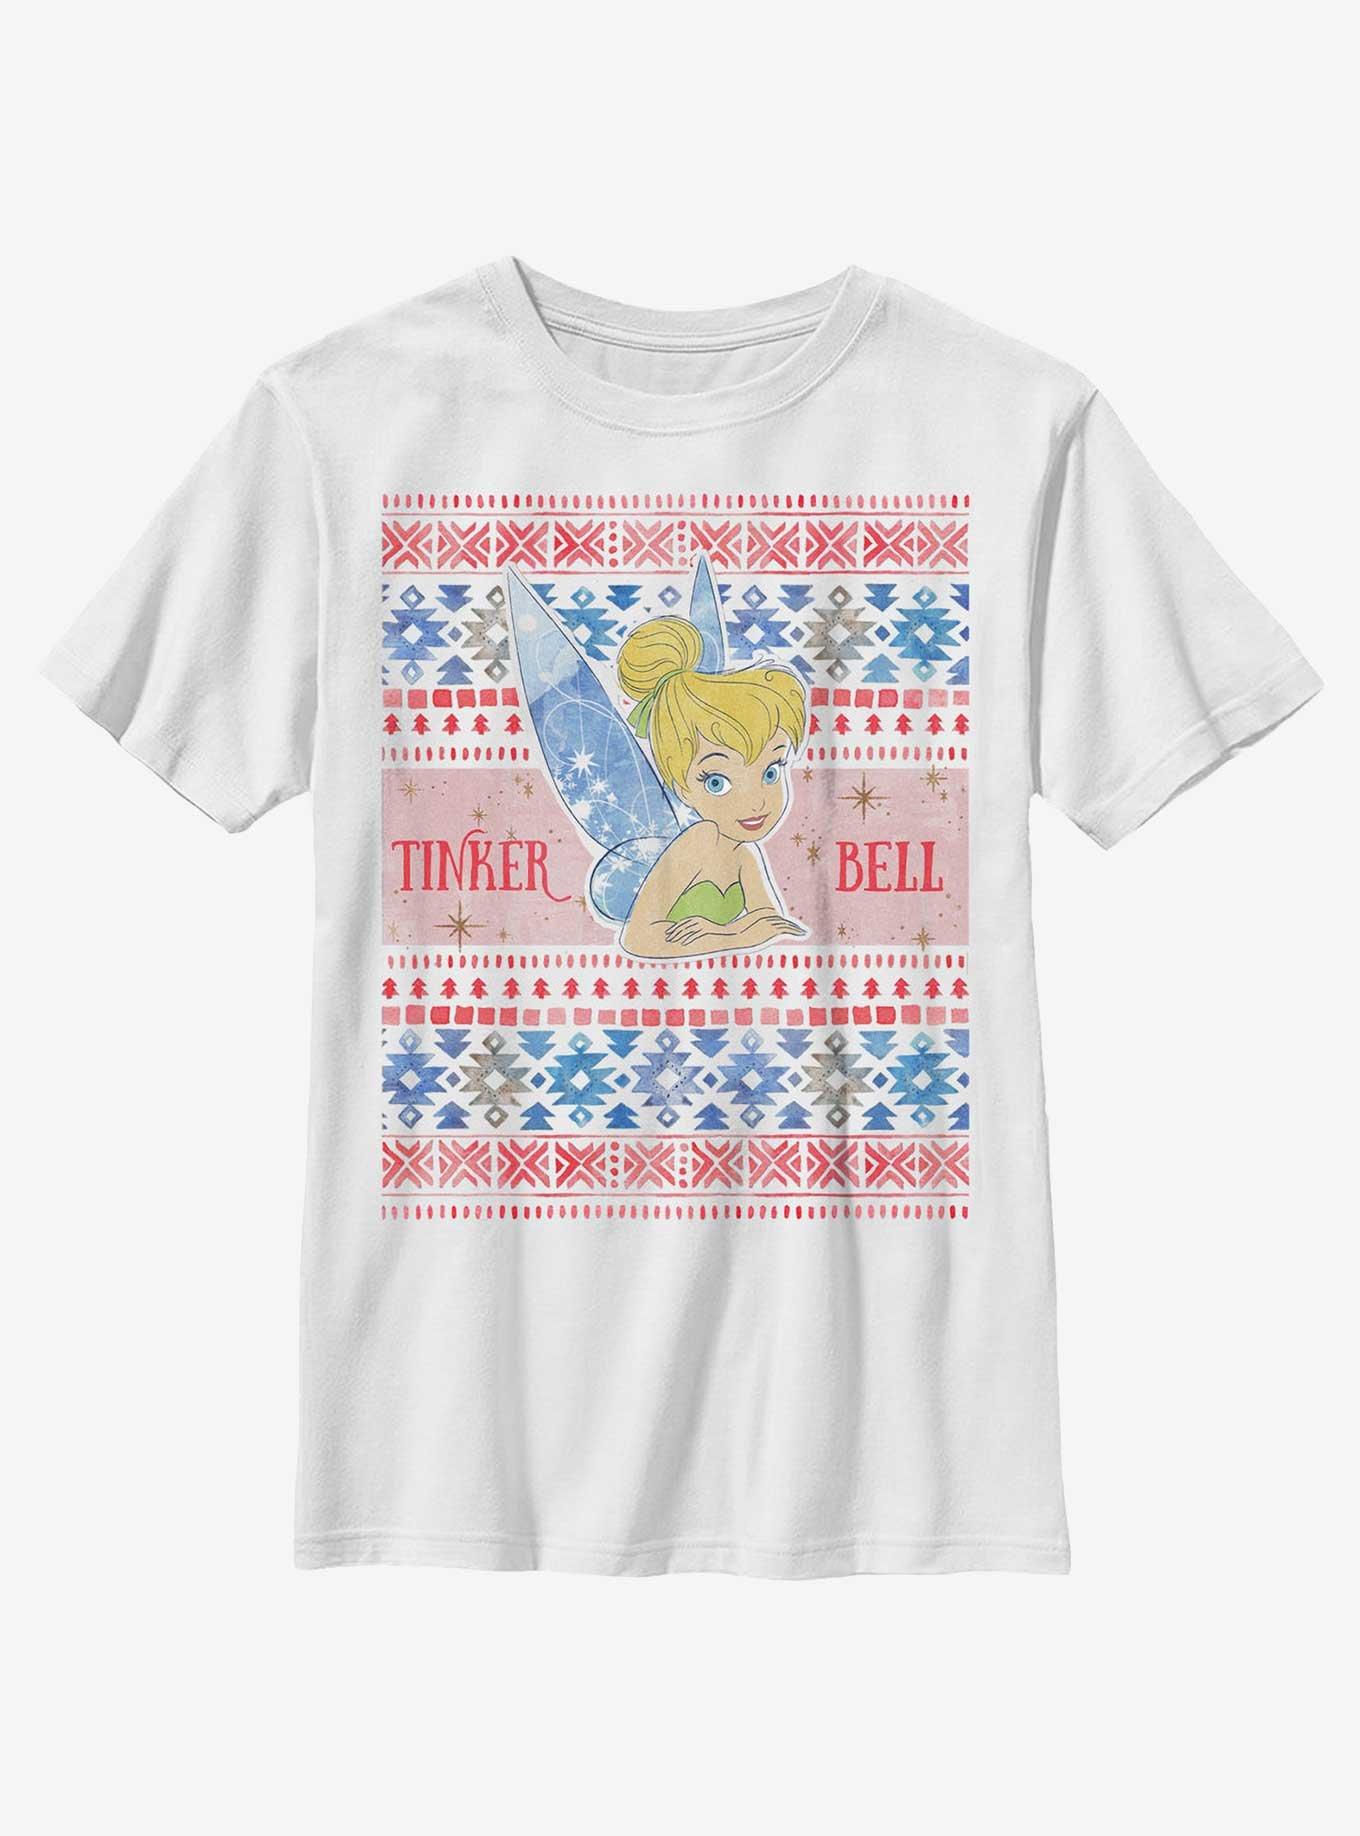 Disney Tinker bell Ugly Holiday Youth T-Shirt, WHITE, hi-res